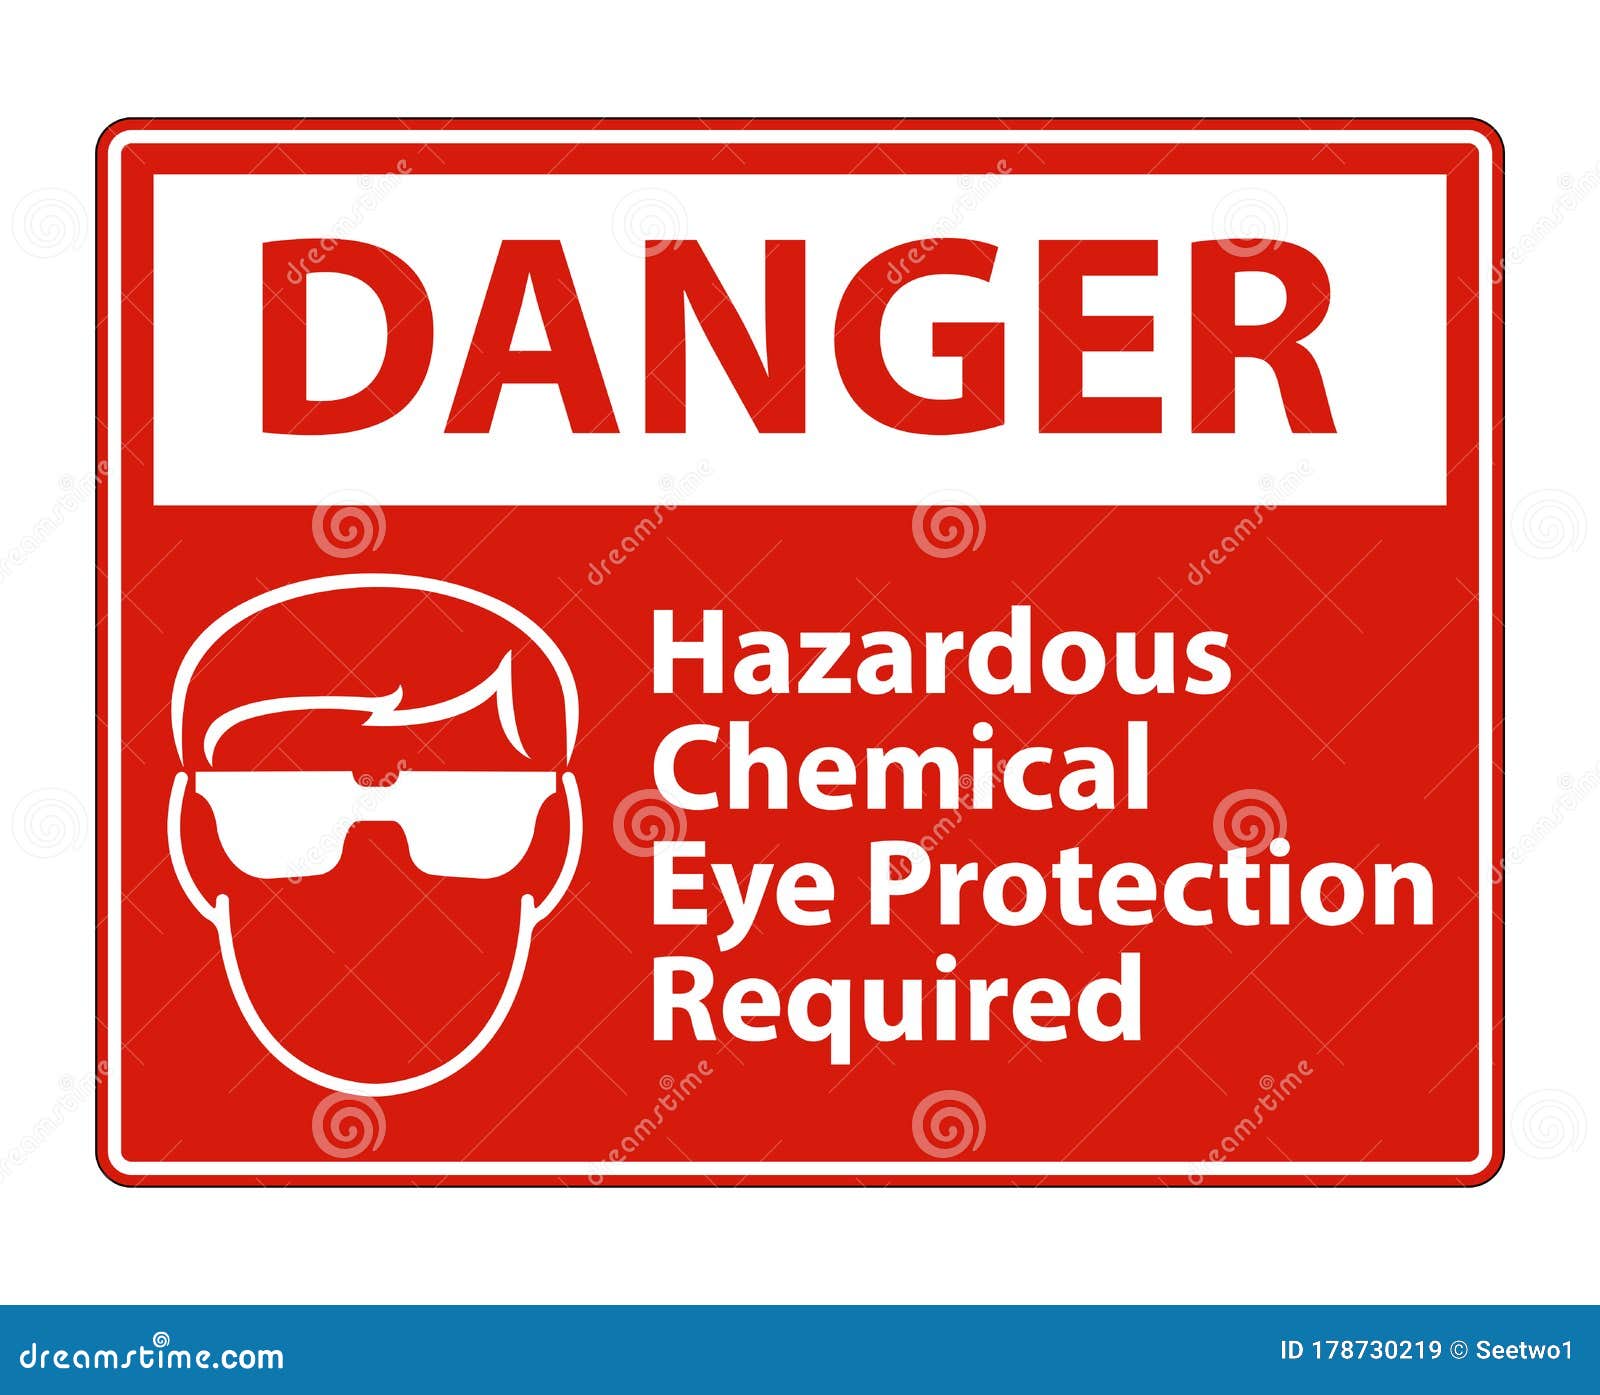 hazardous-chemical-eye-protection-required-symbol-sign-isolate-on-white